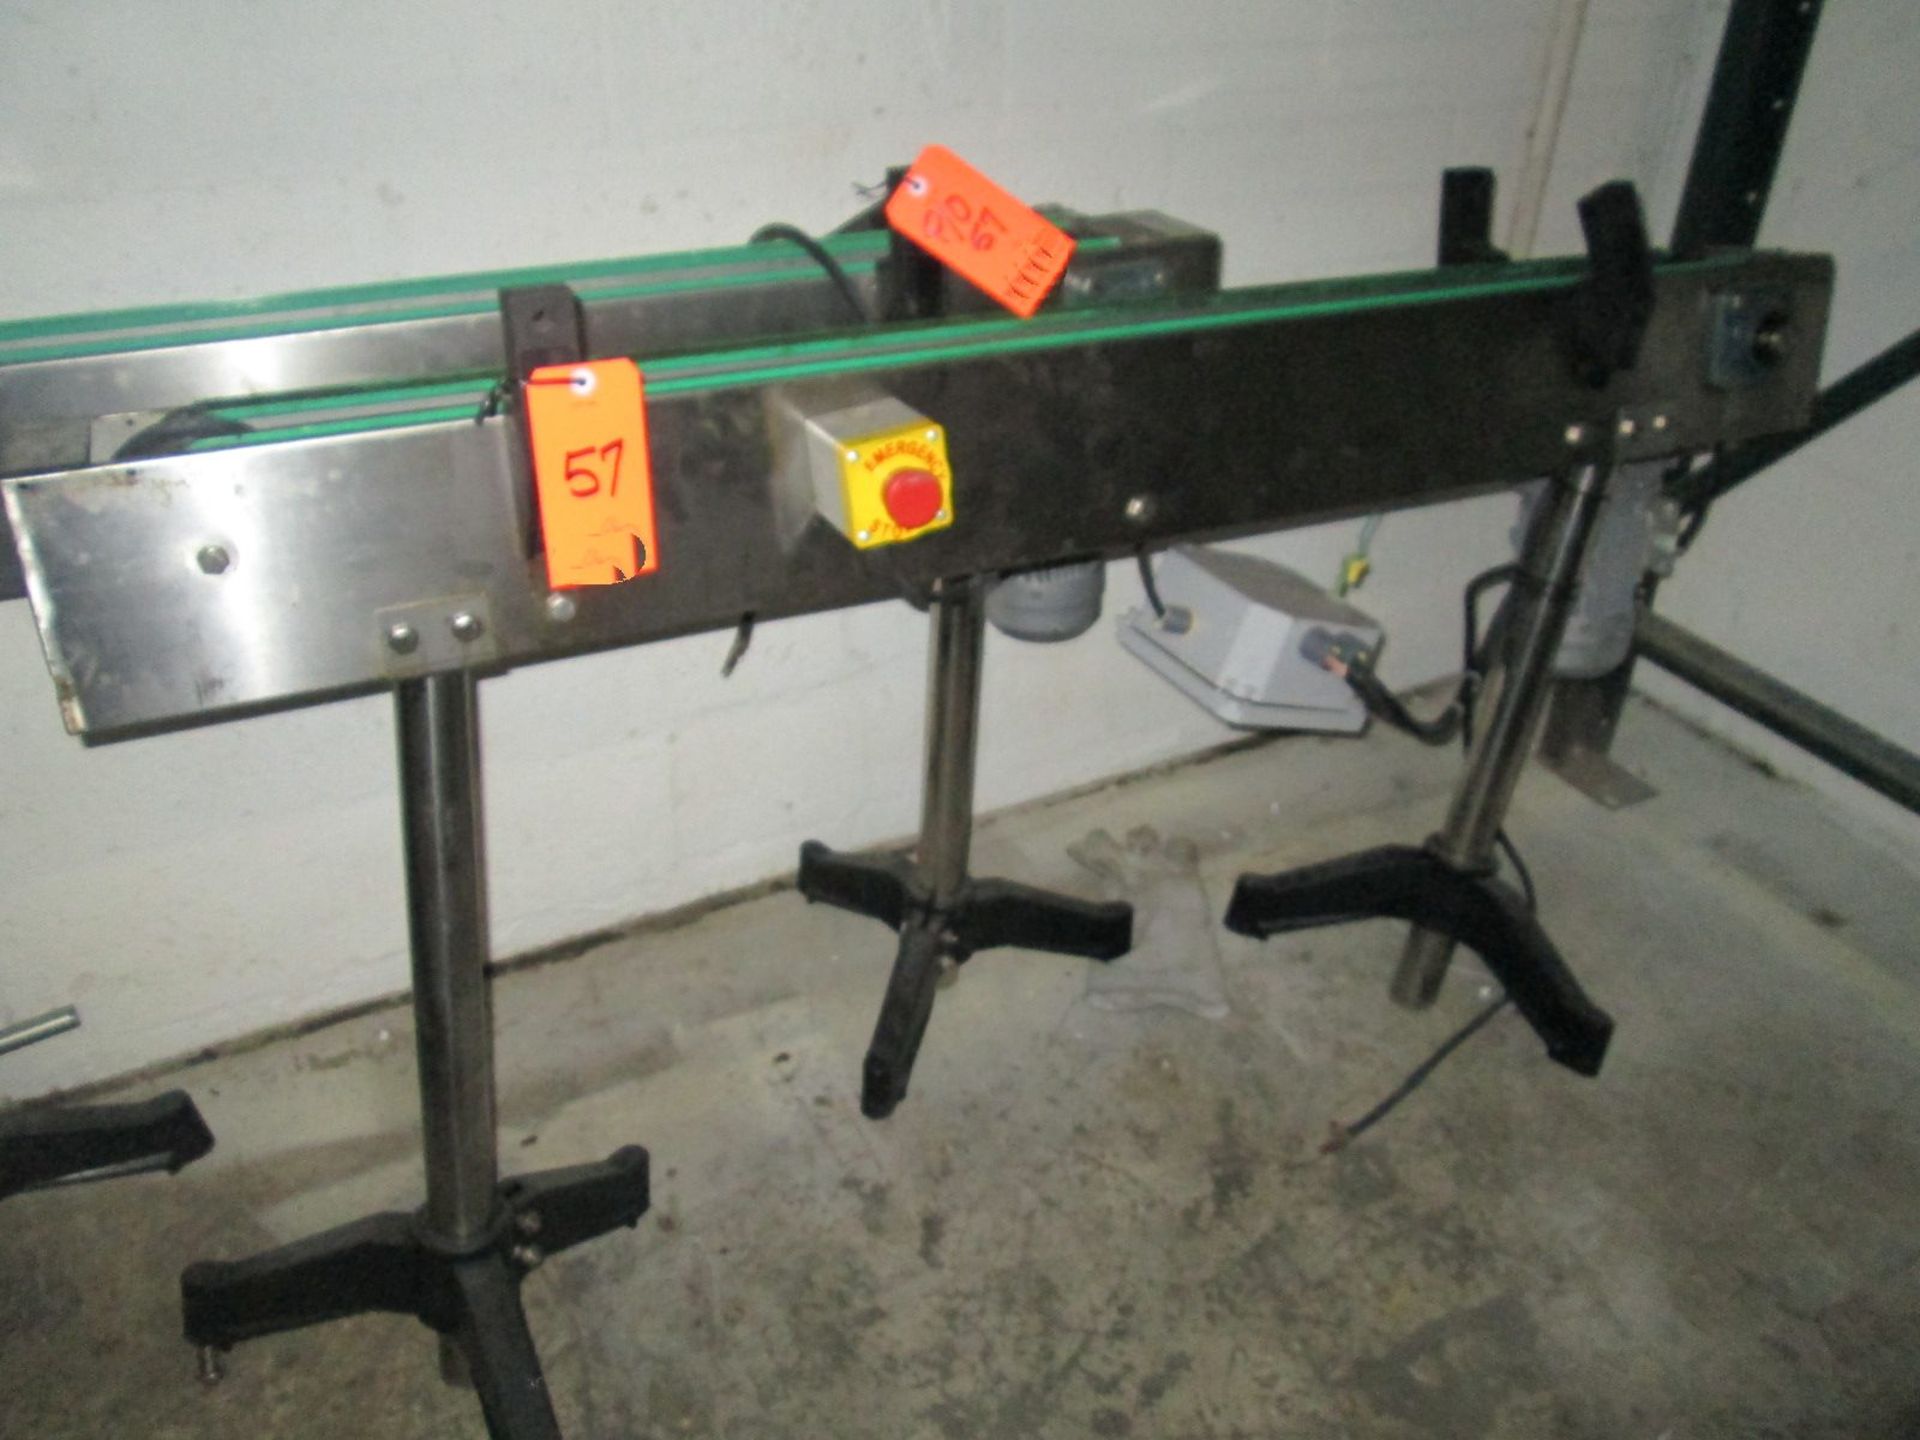 Lot of (2) Stainless Steel Conveyor Sections 4" x 30" long on legs, each equipped with electric - Image 2 of 3